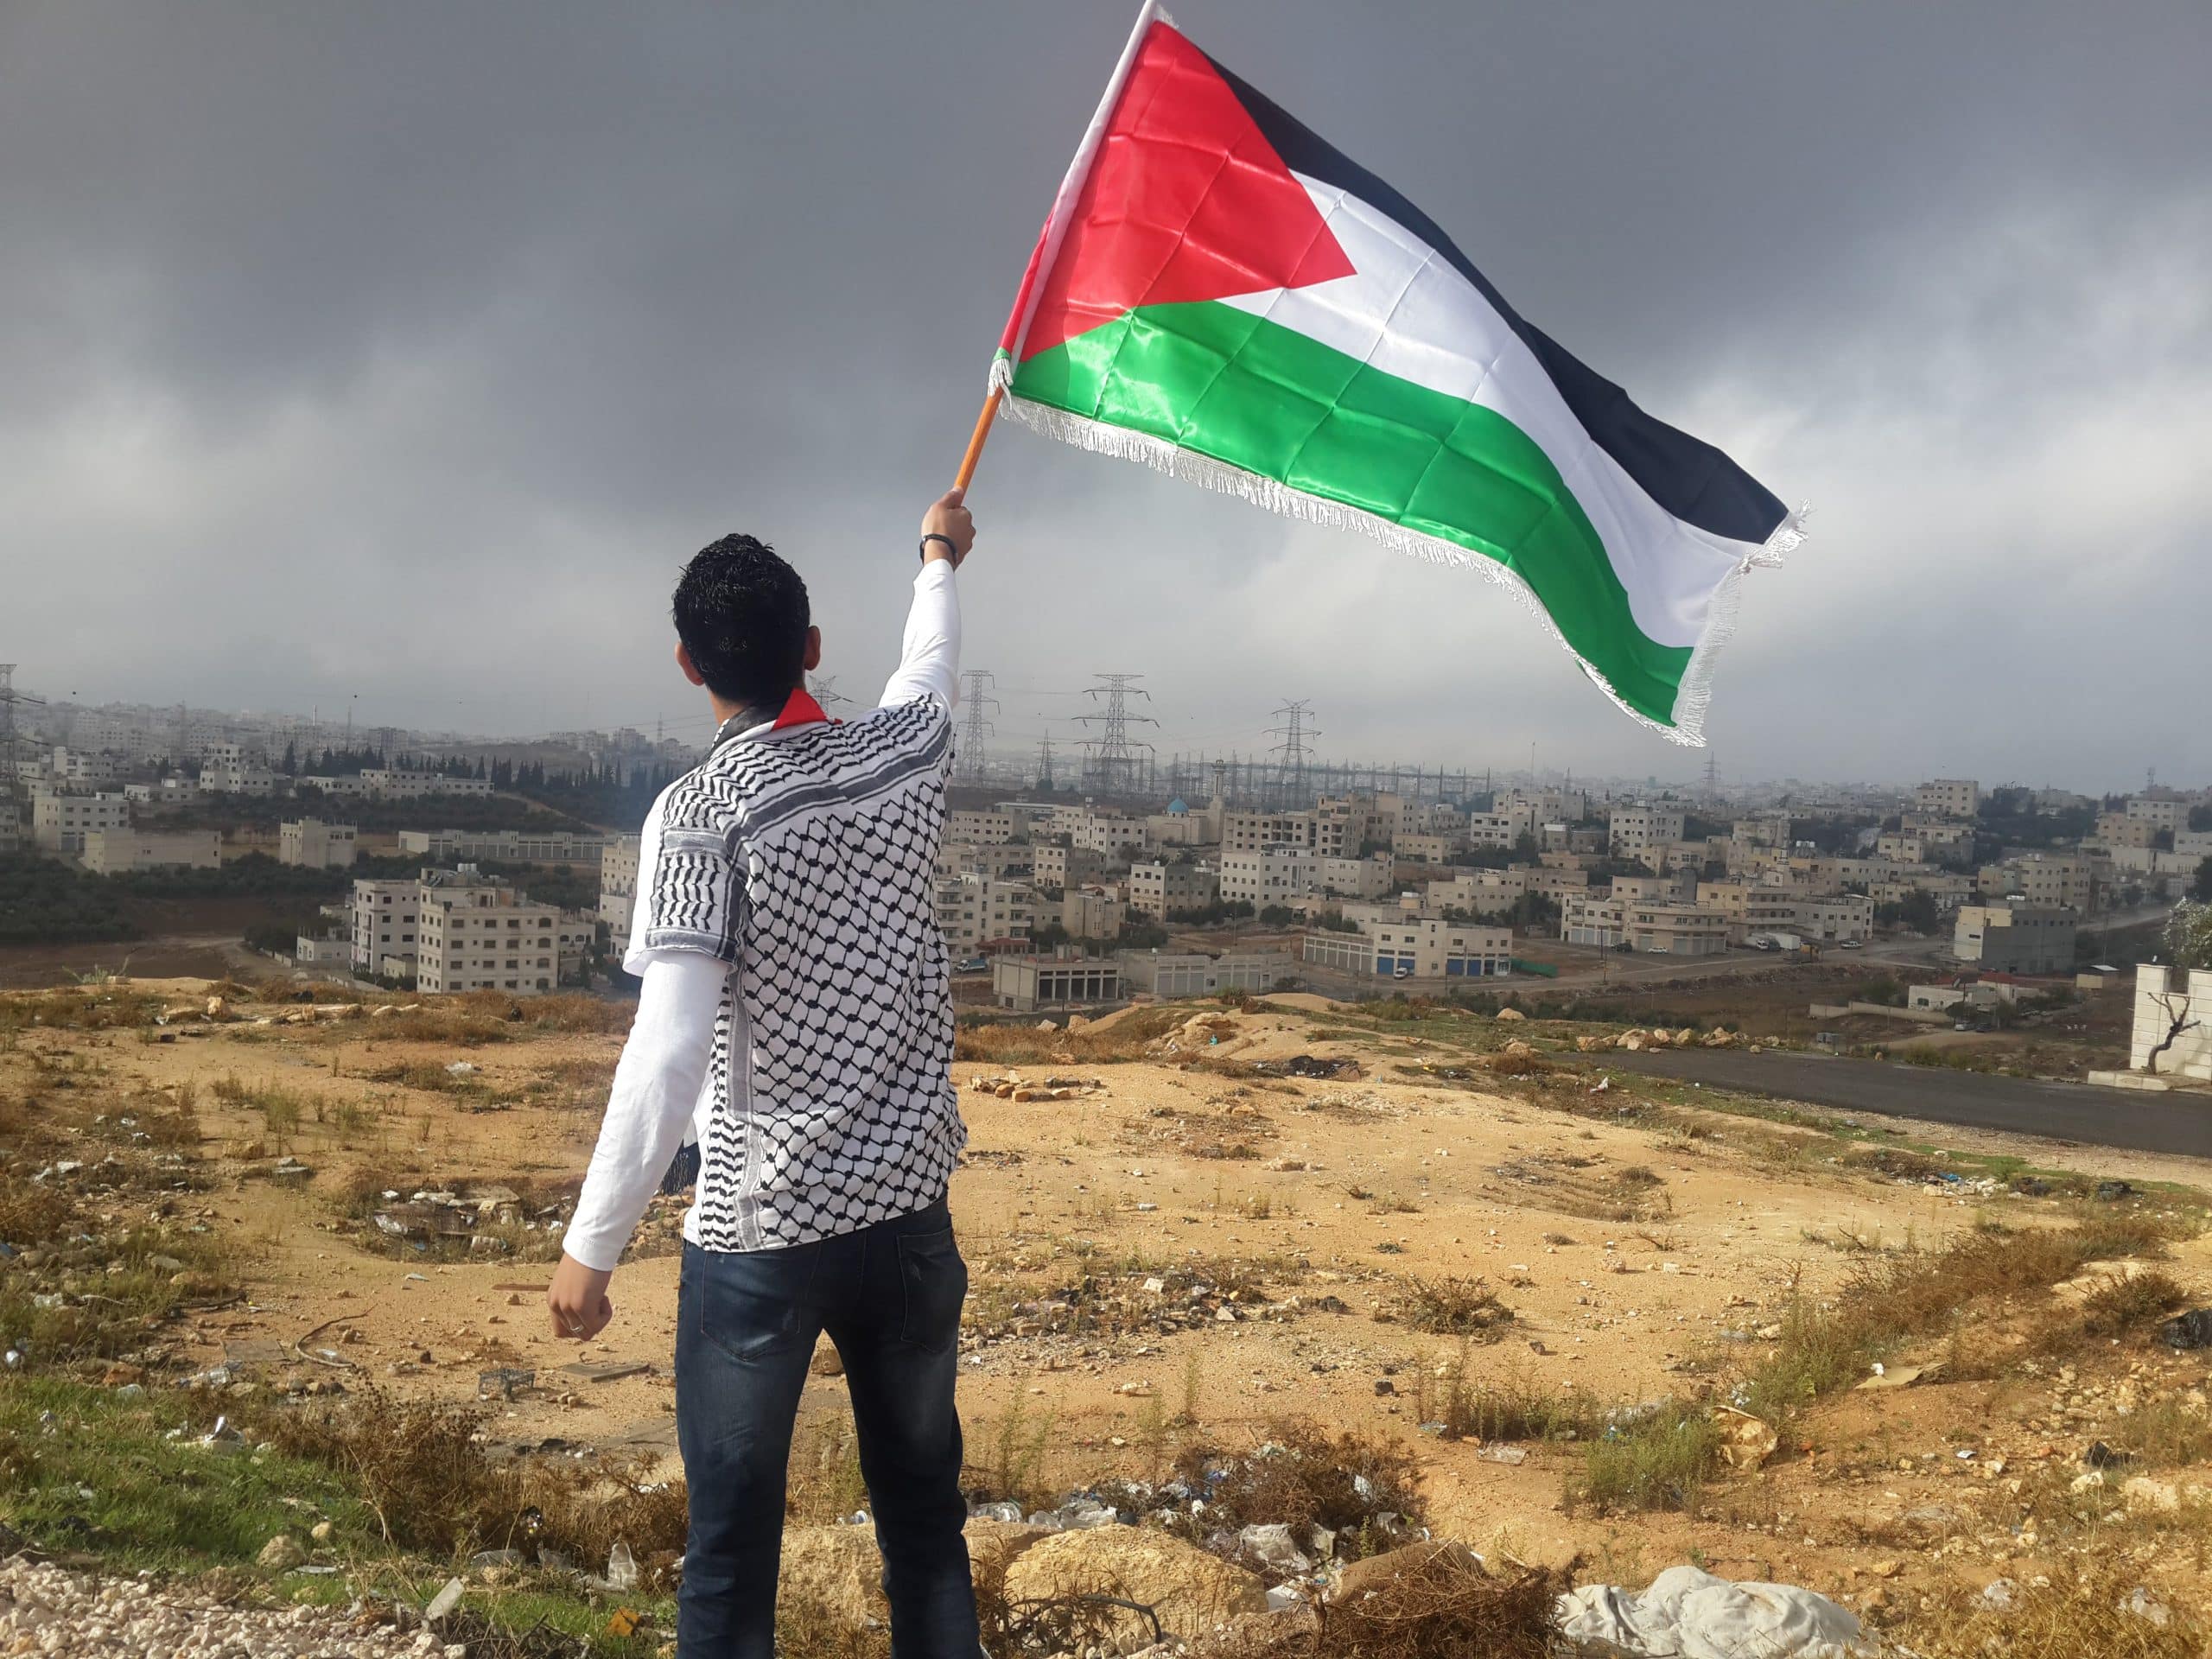 Young Palestinian Waving the flag - Article Image